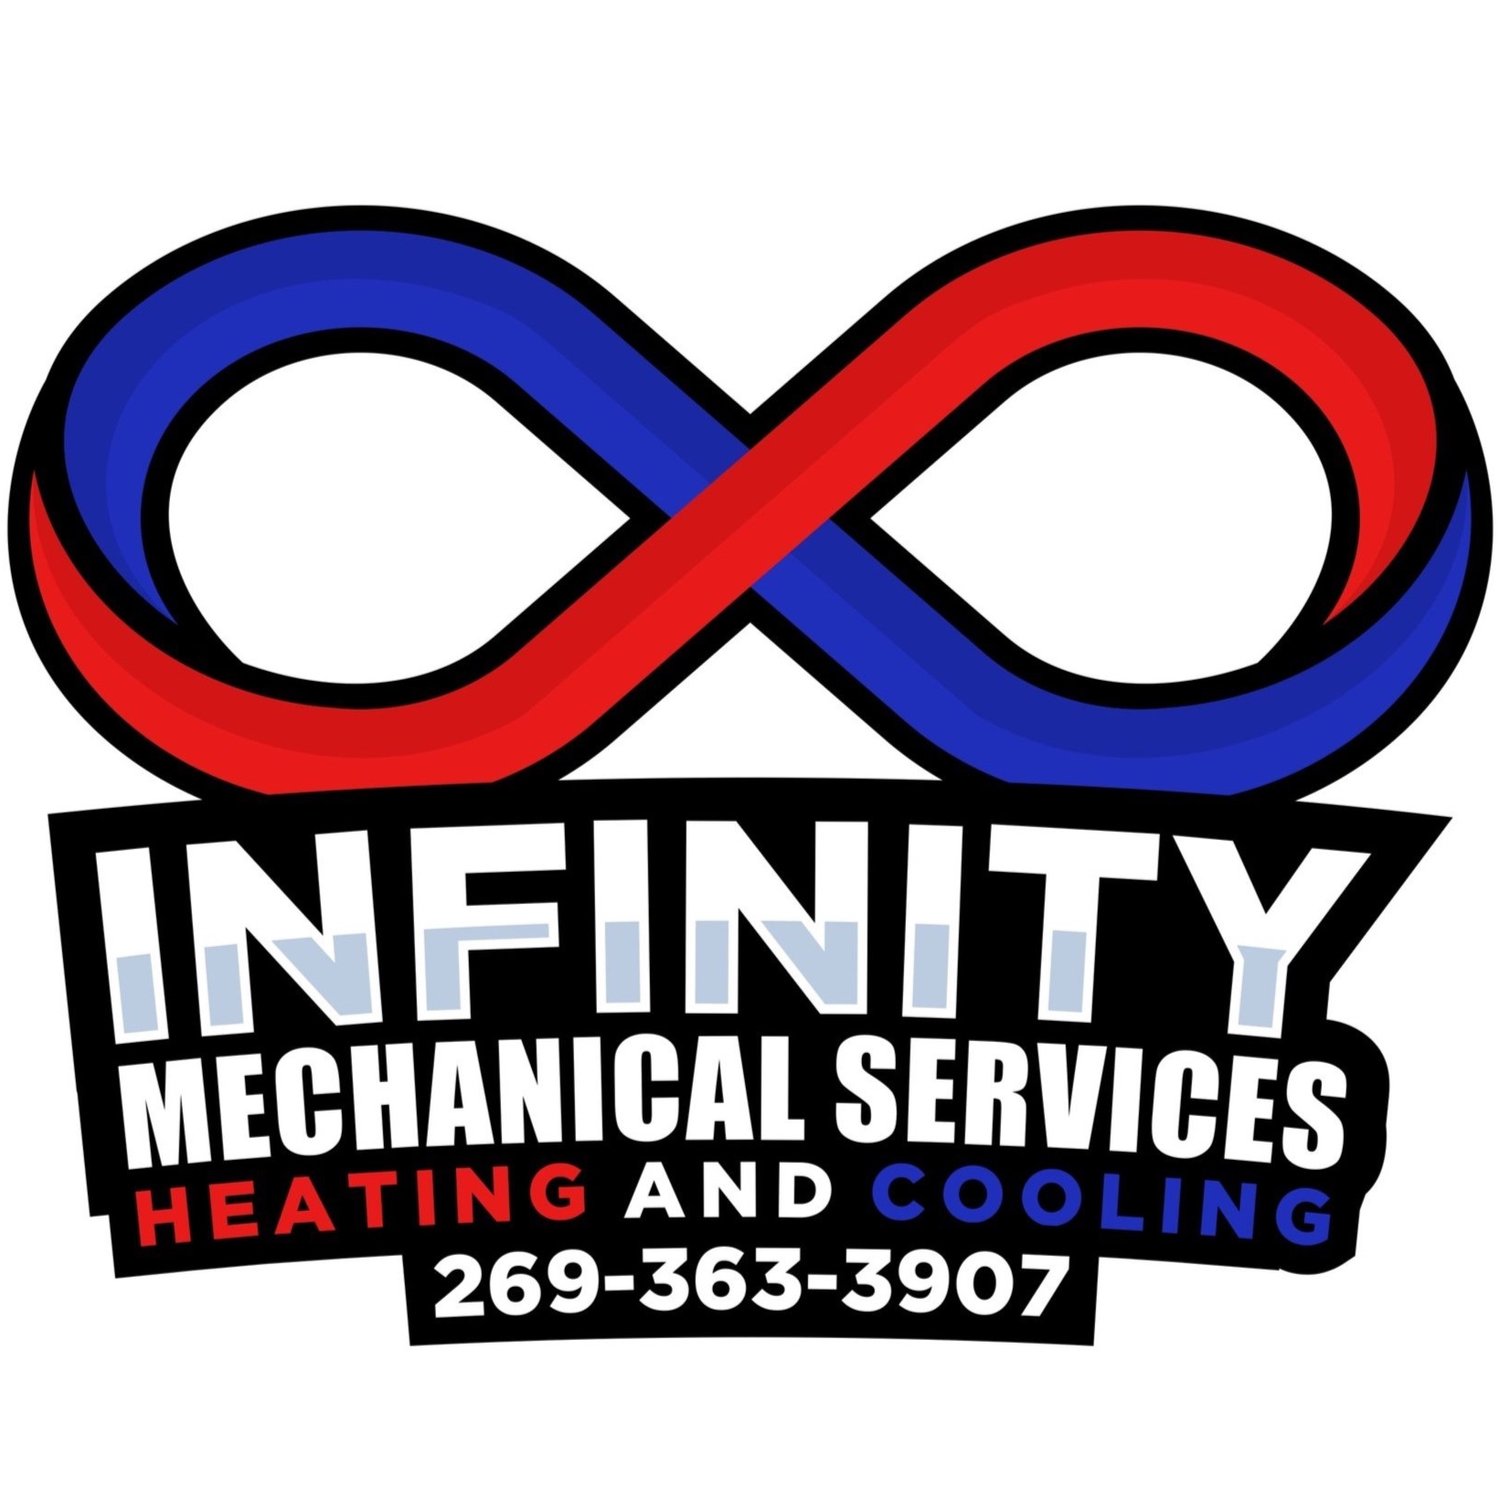 Infinity Mechanical Services